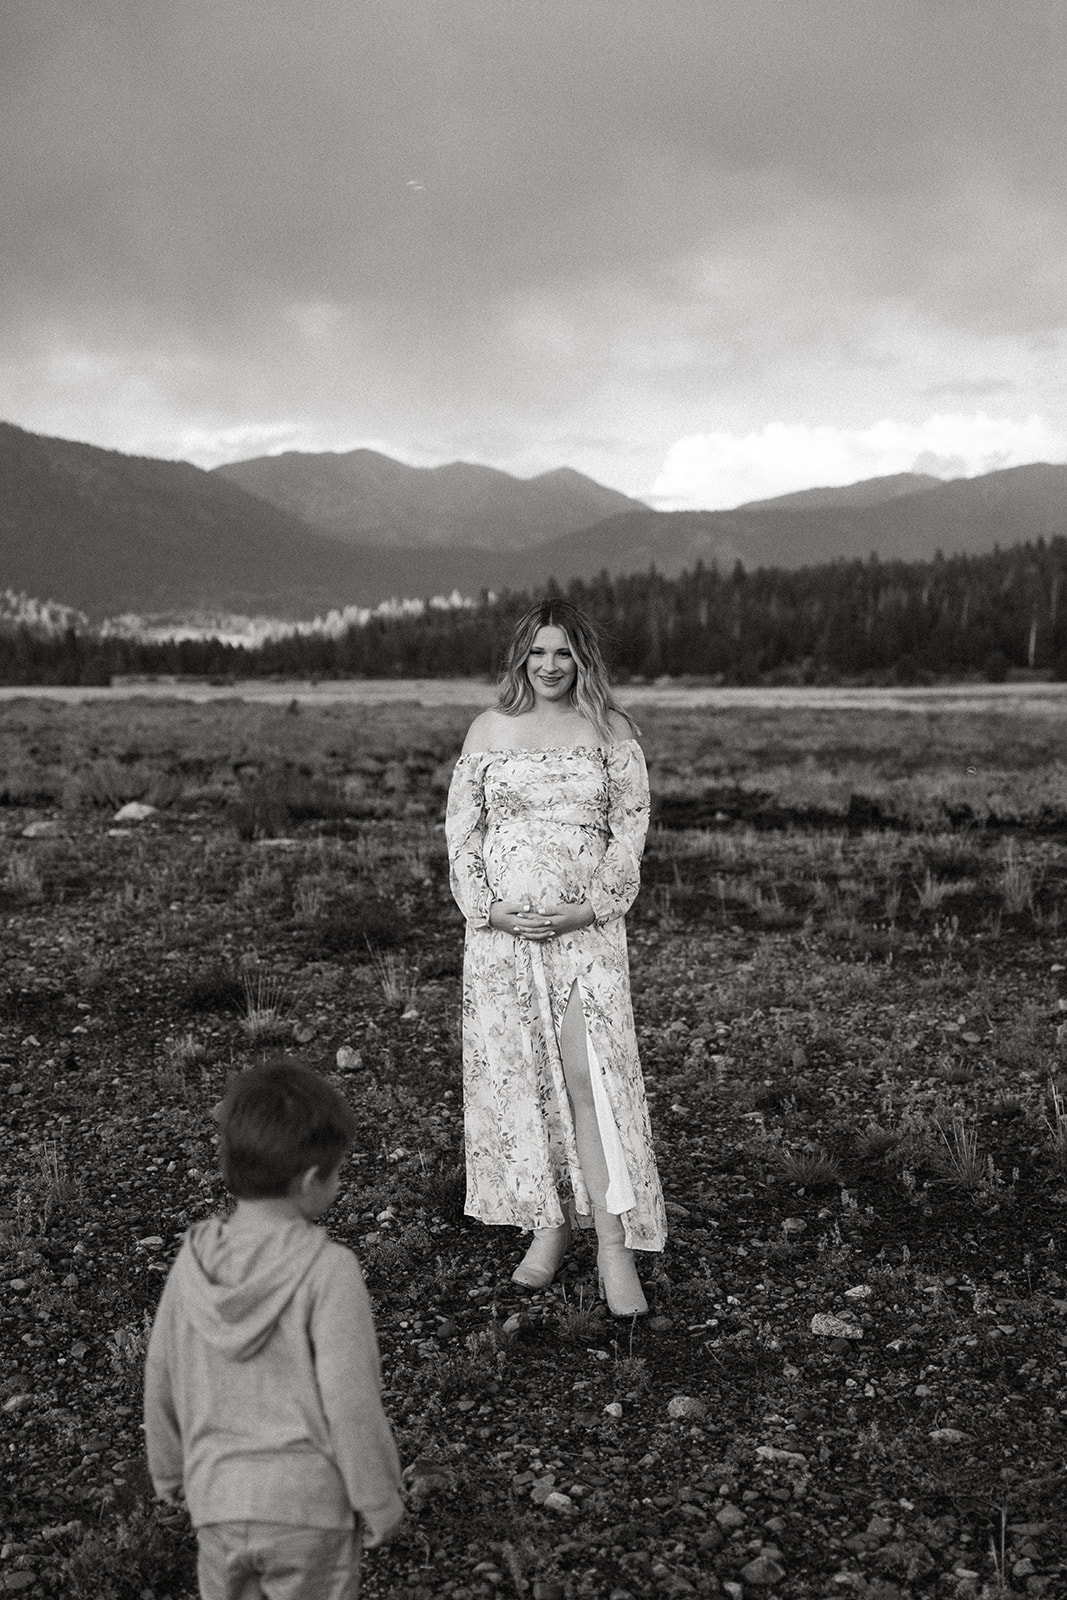 this black and white image of a son gazing at his mother during her maternity photos is beyond precious.